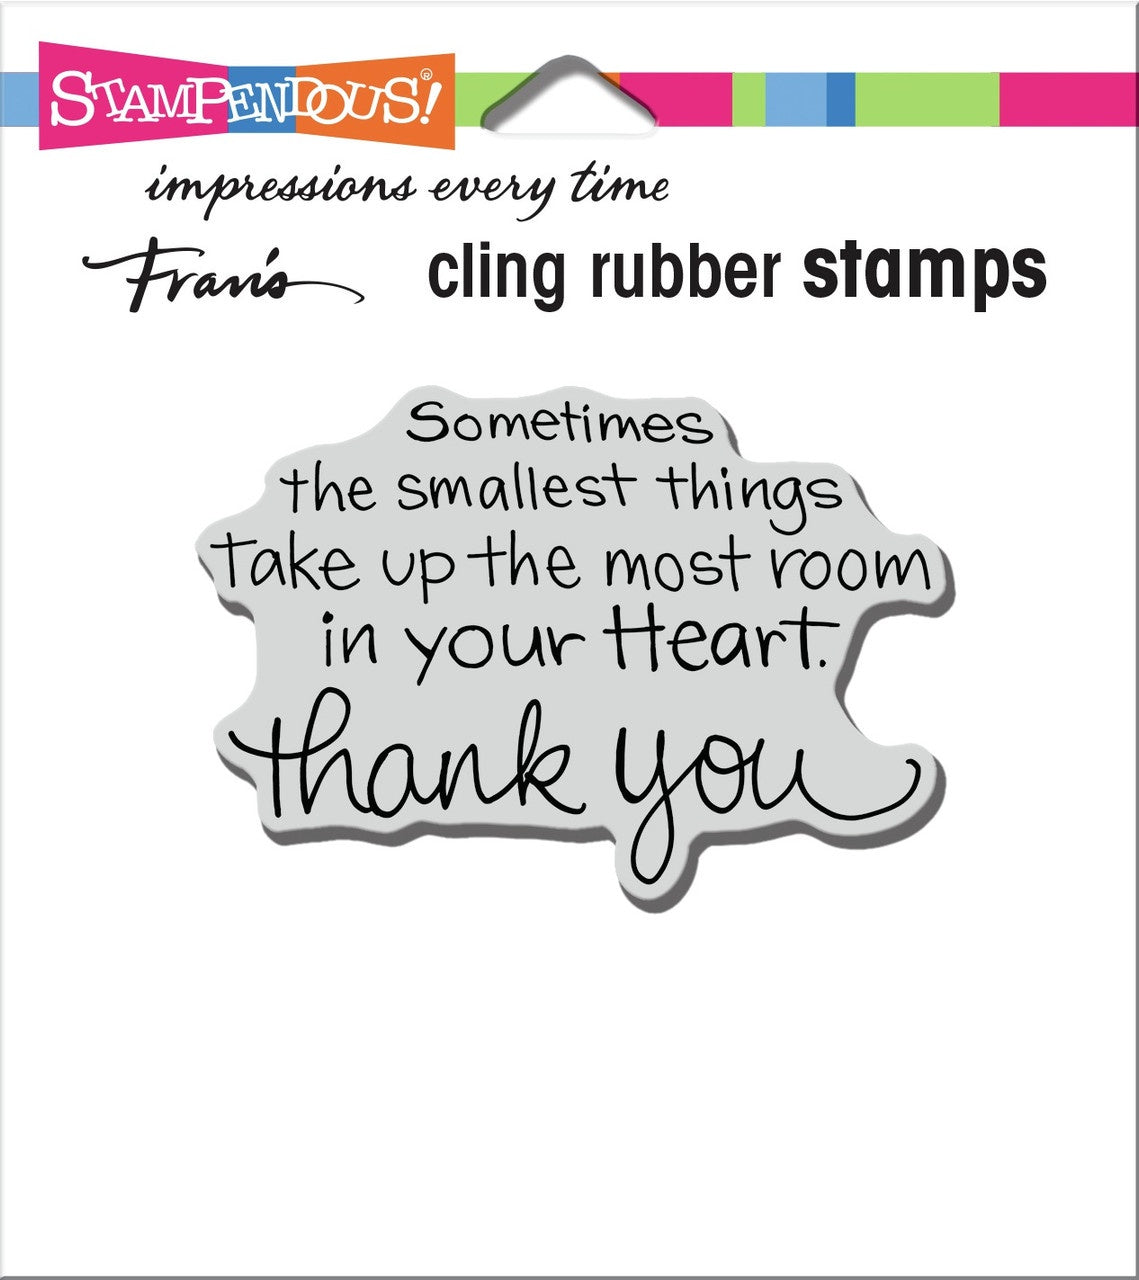 STA CLING SMALLEST THINGS STAMP